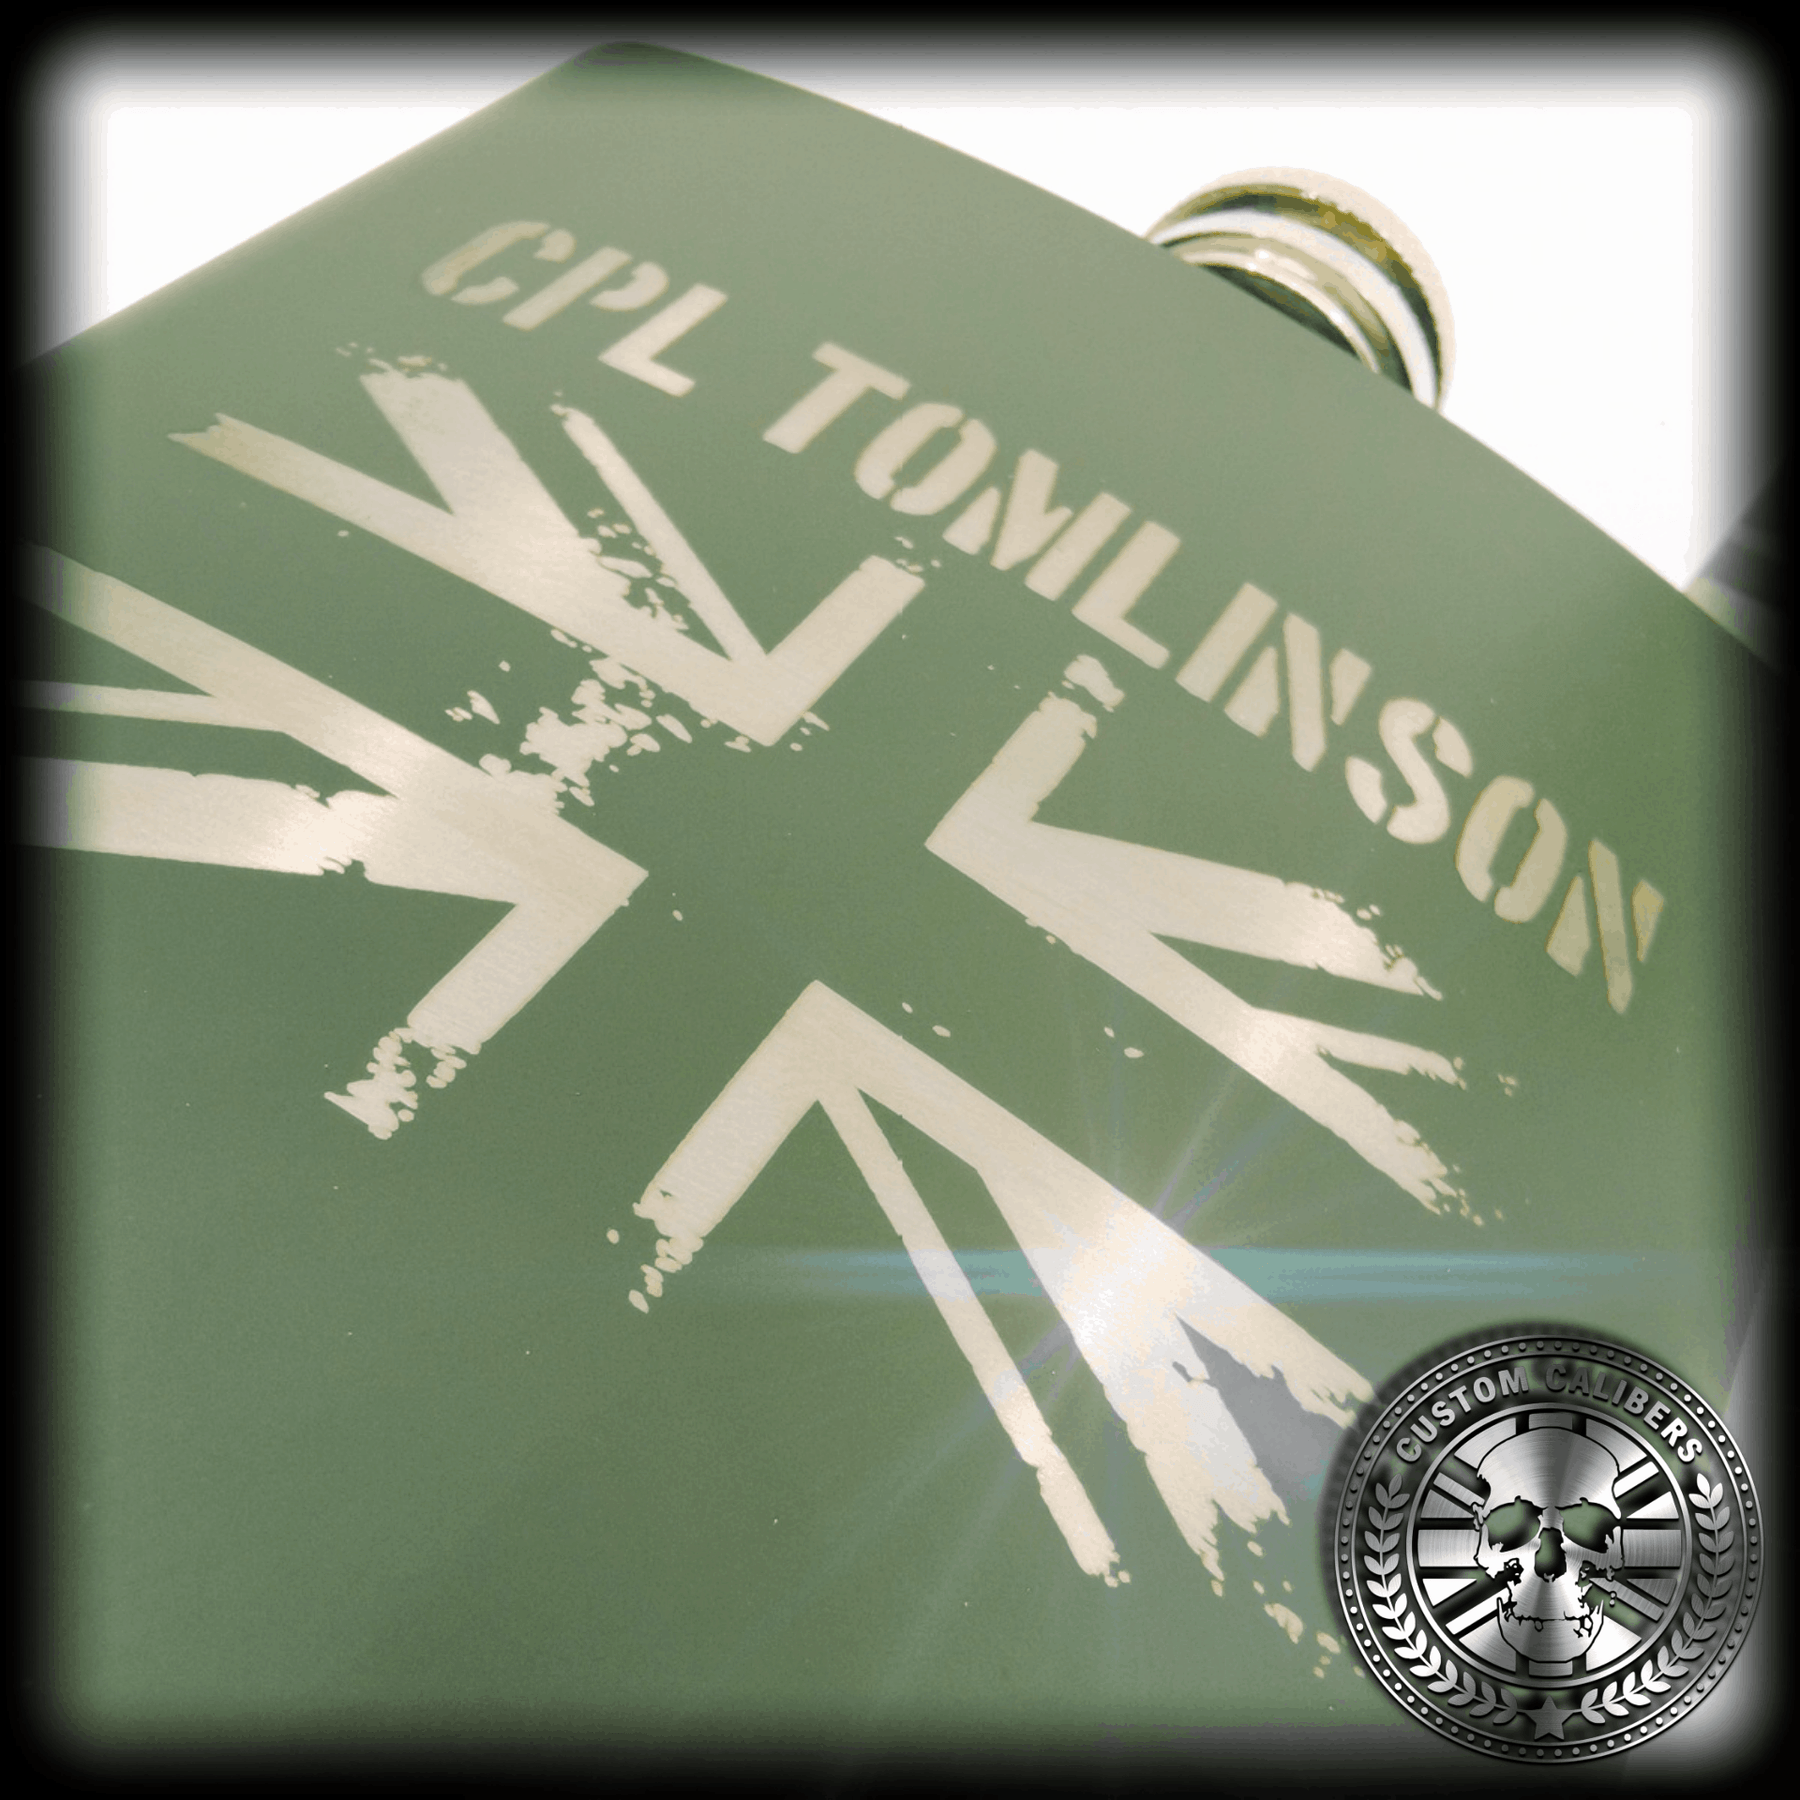 Another macro shot of a NATO green hipflask engraved with a union jack design